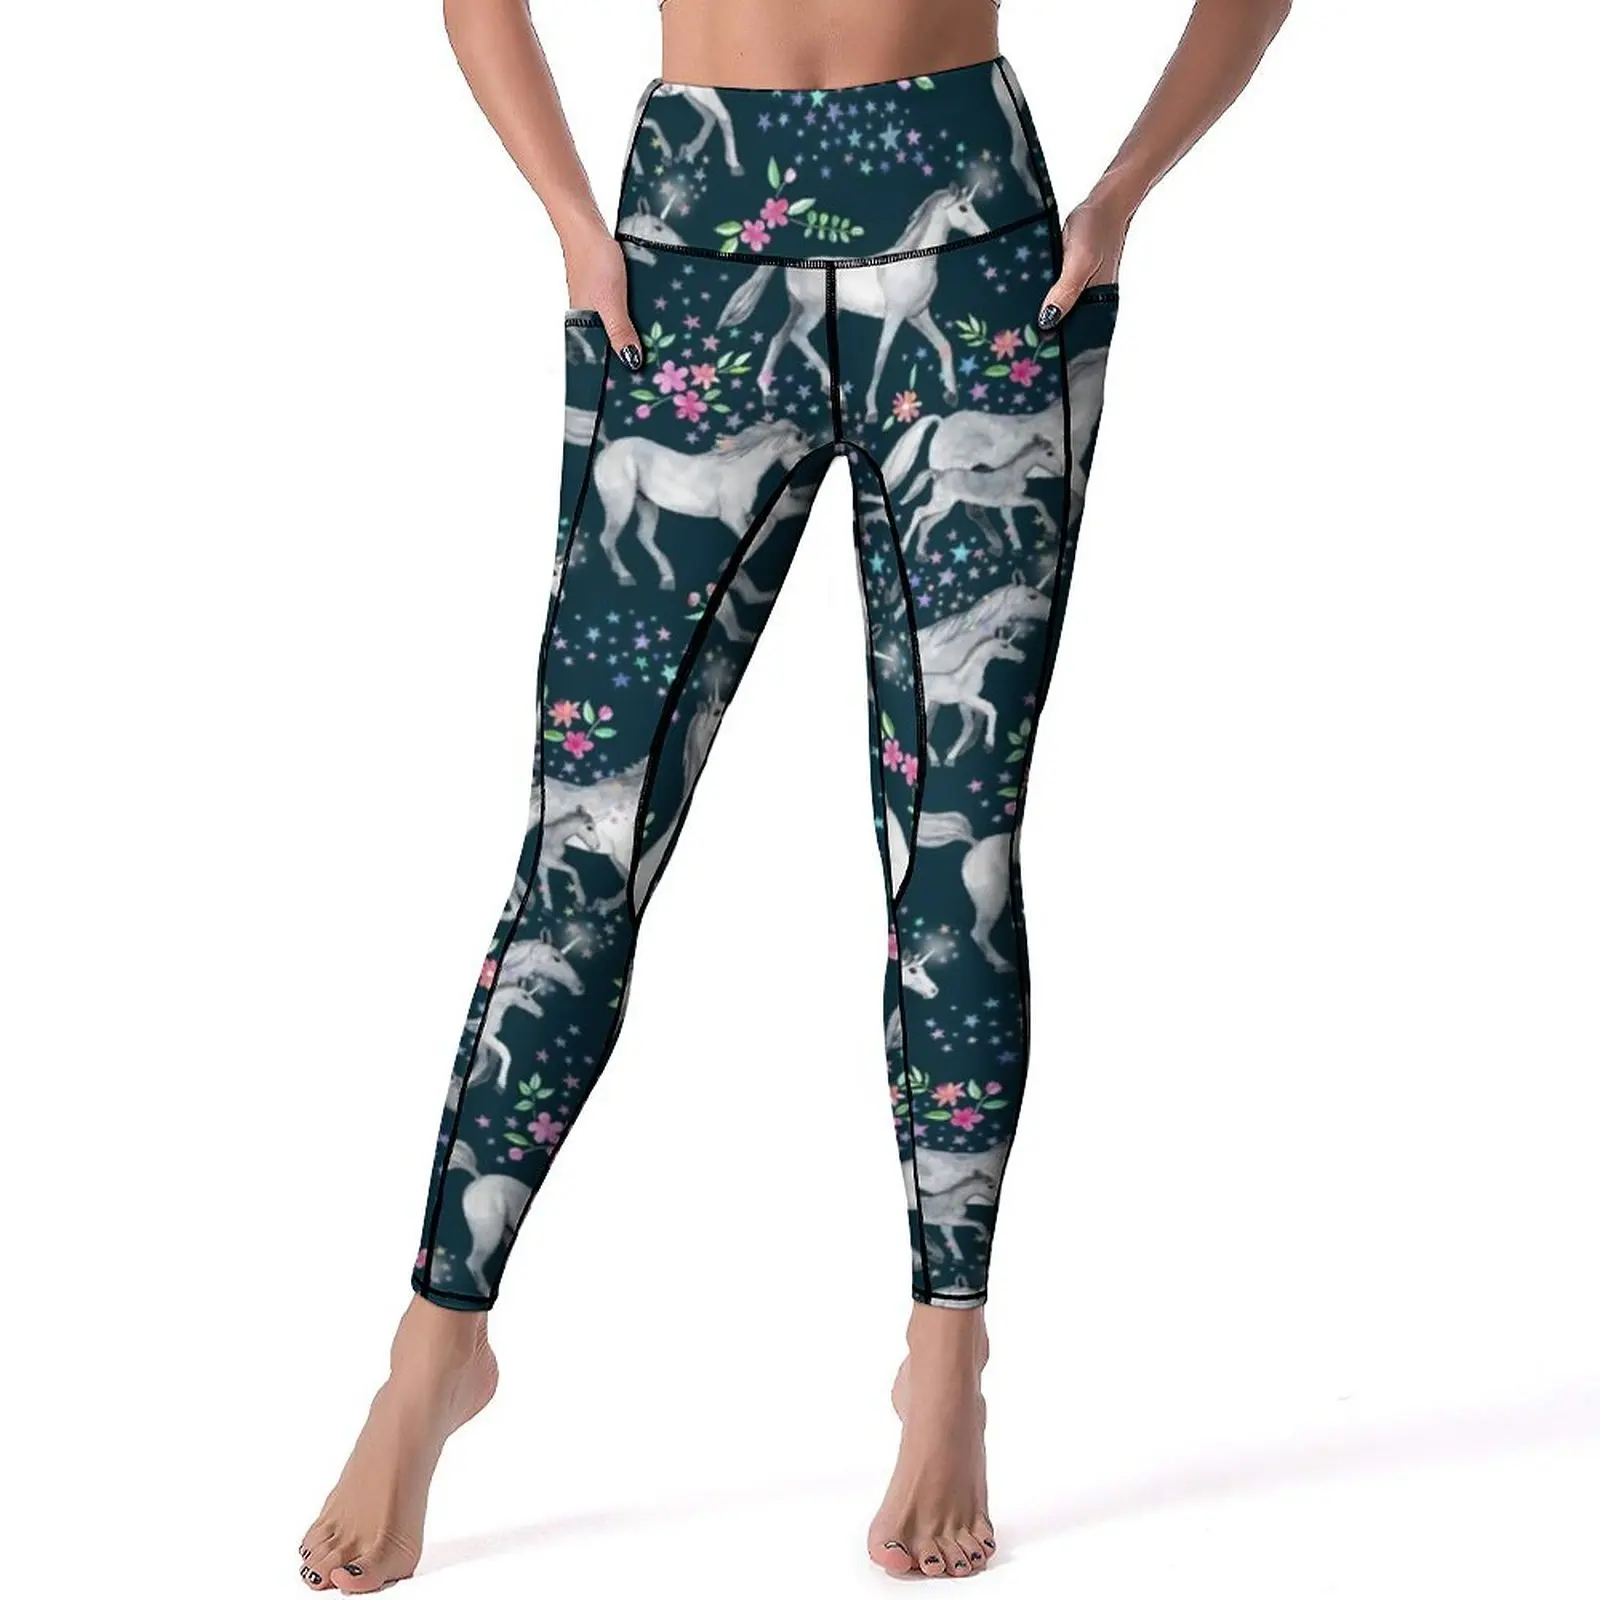 

Unicorn And Stars Yoga Pants Sexy Floral Print Graphic Leggings Push Up Fitness Leggins Lady Fashion Stretch Sports Tights